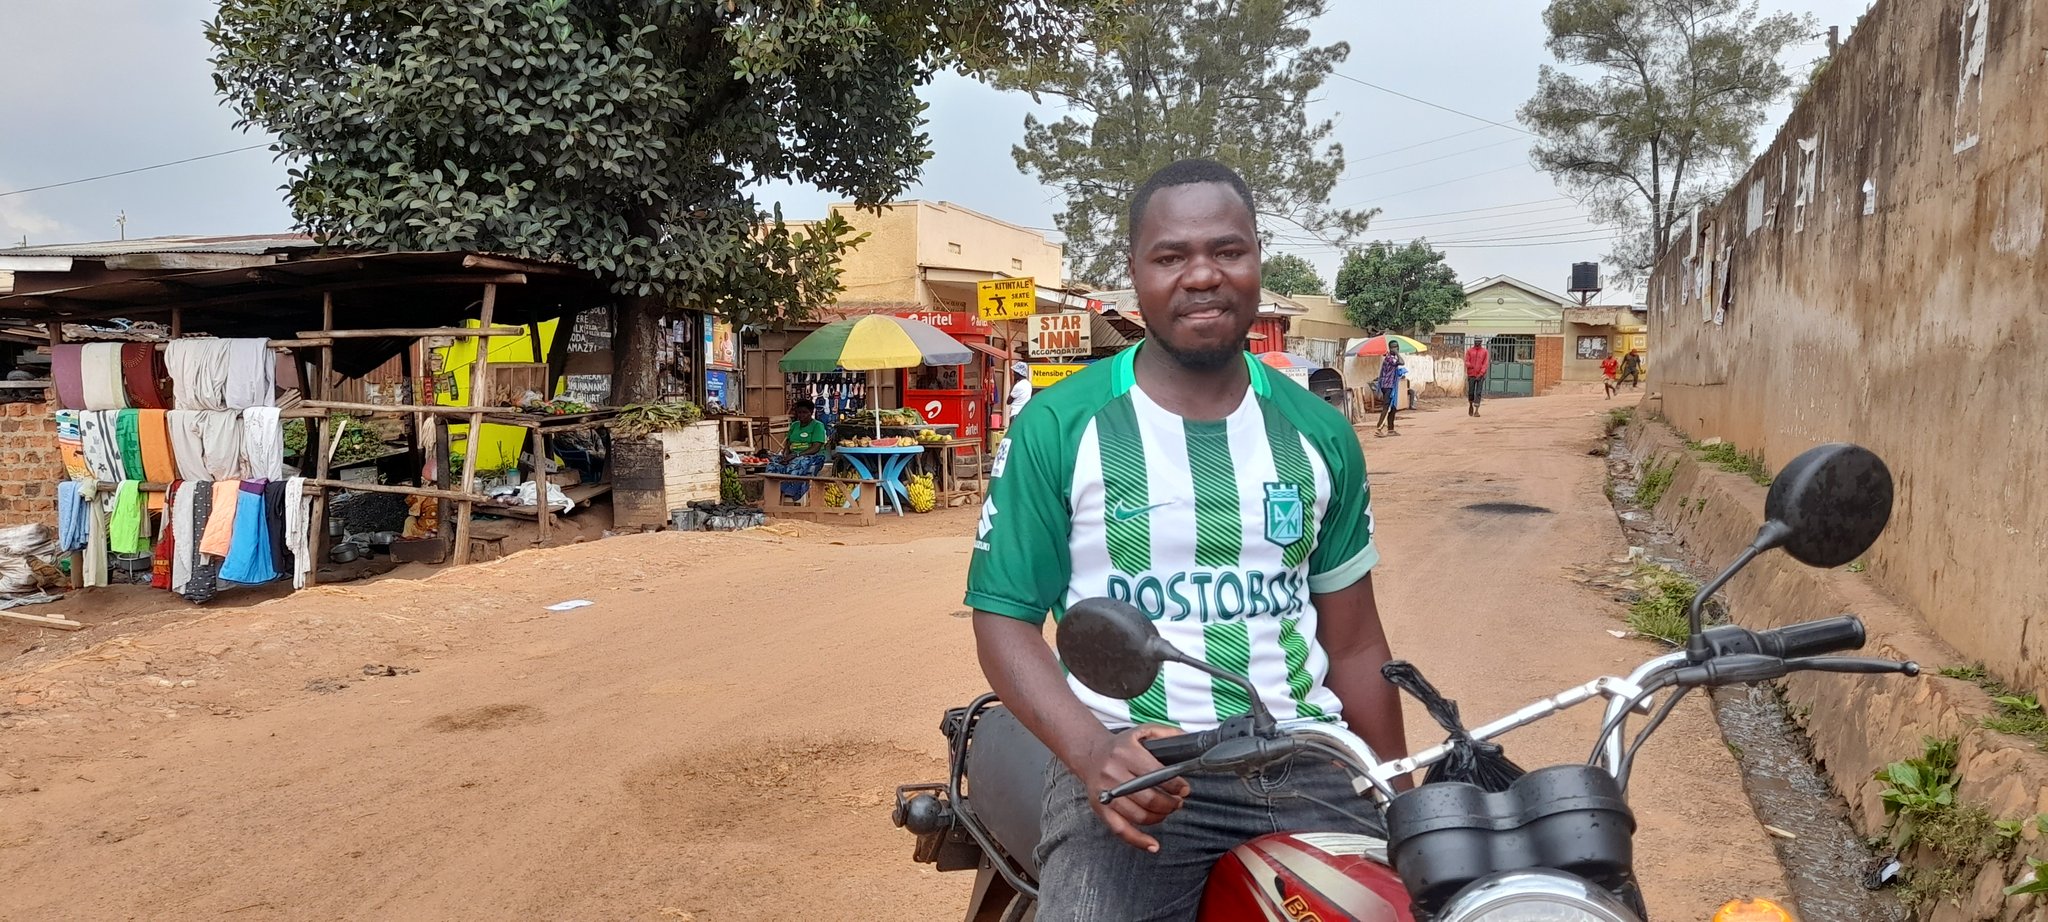 Atlético Nacional NEWS: The story of the African in his jersey